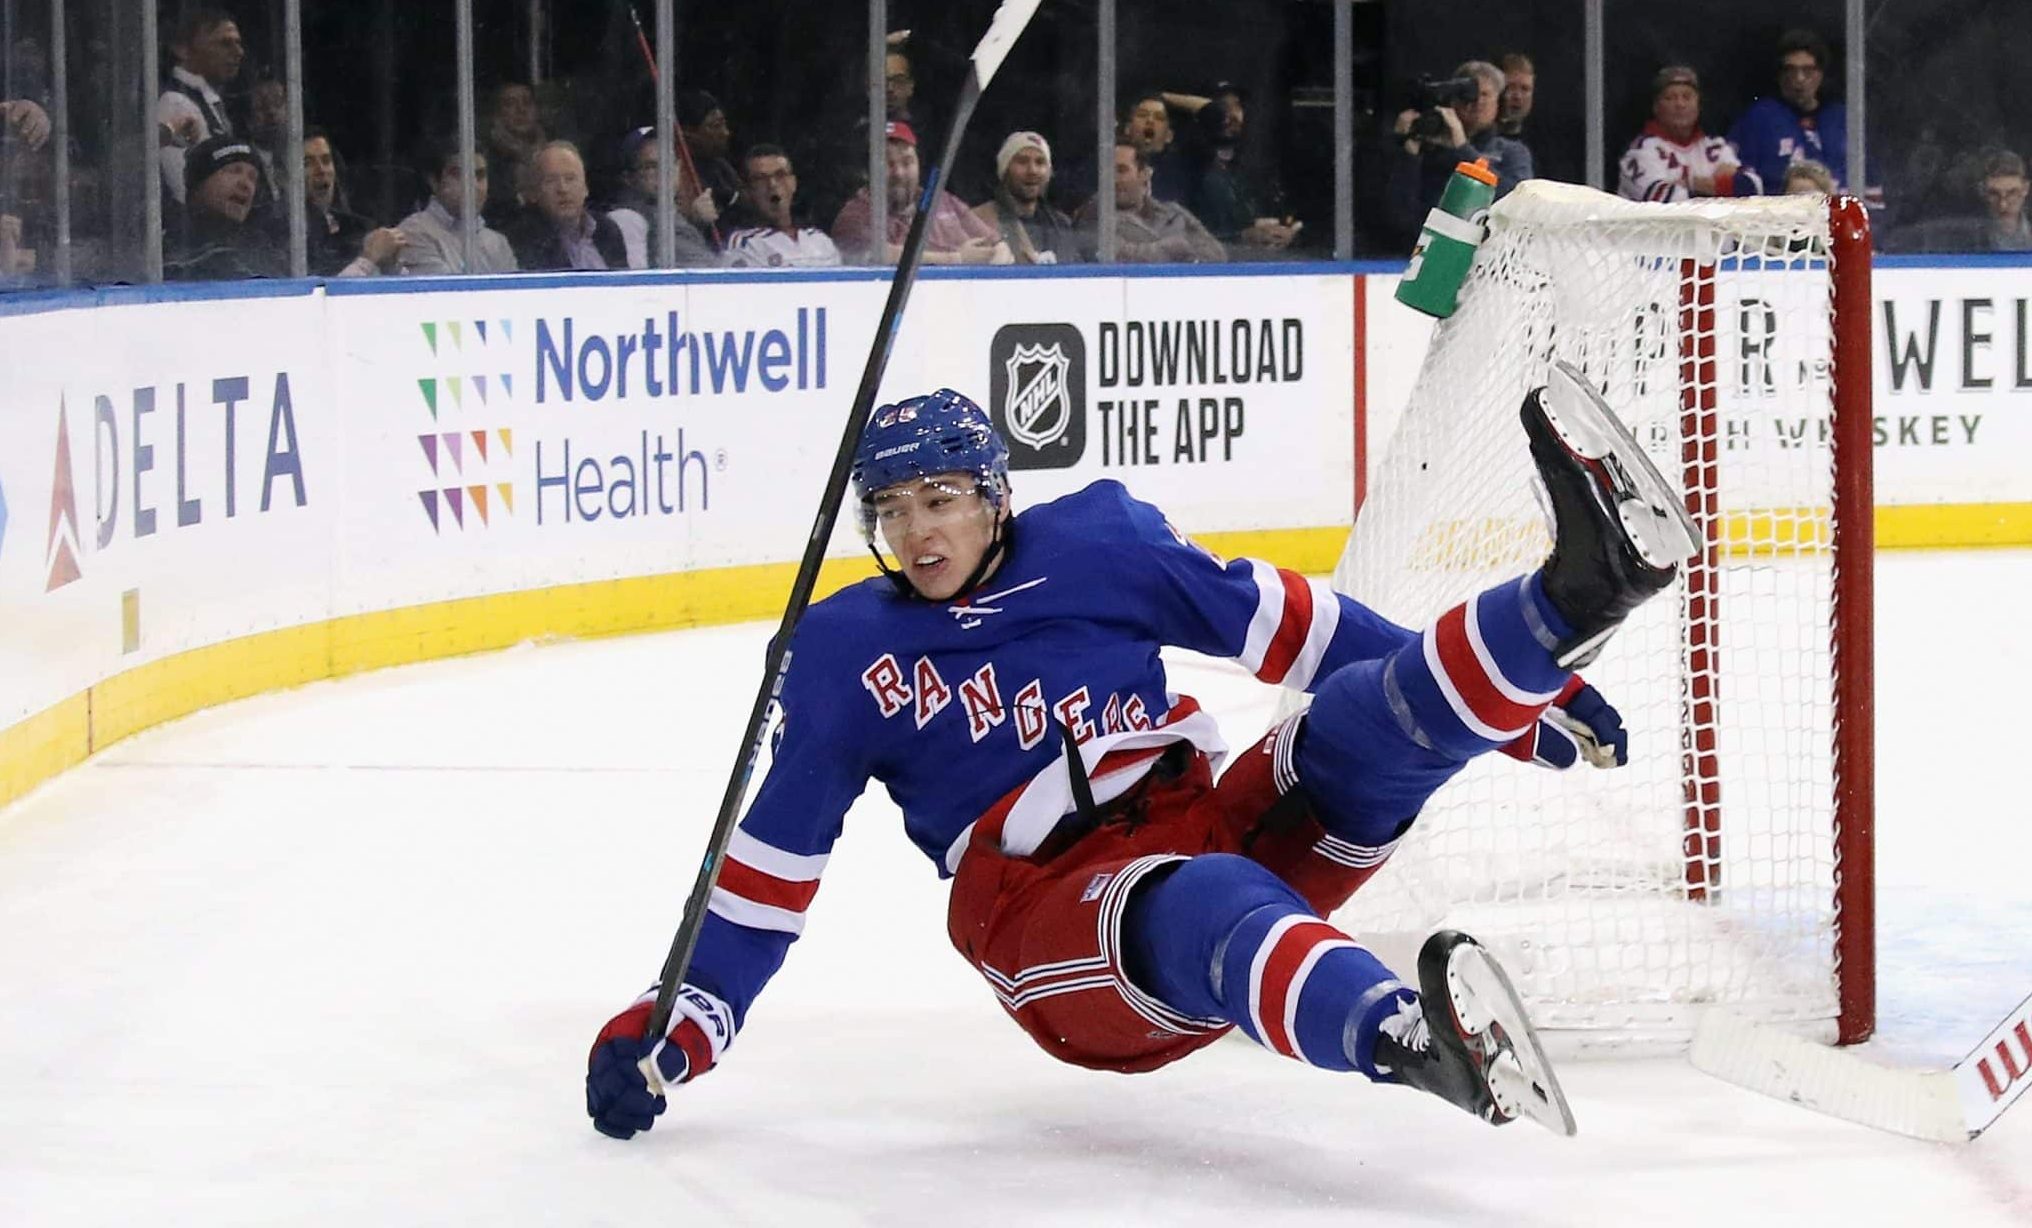 NEW YORK, NEW YORK - NOVEMBER 06: Libor Hajek #25 of the New York Rangers is tripped up by Jimmy Howard #35 of the Detroit Red Wings during the second period at Madison Square Garden on November 06, 2019 in New York City. The Rangers defeated the Red Wings 5-1.